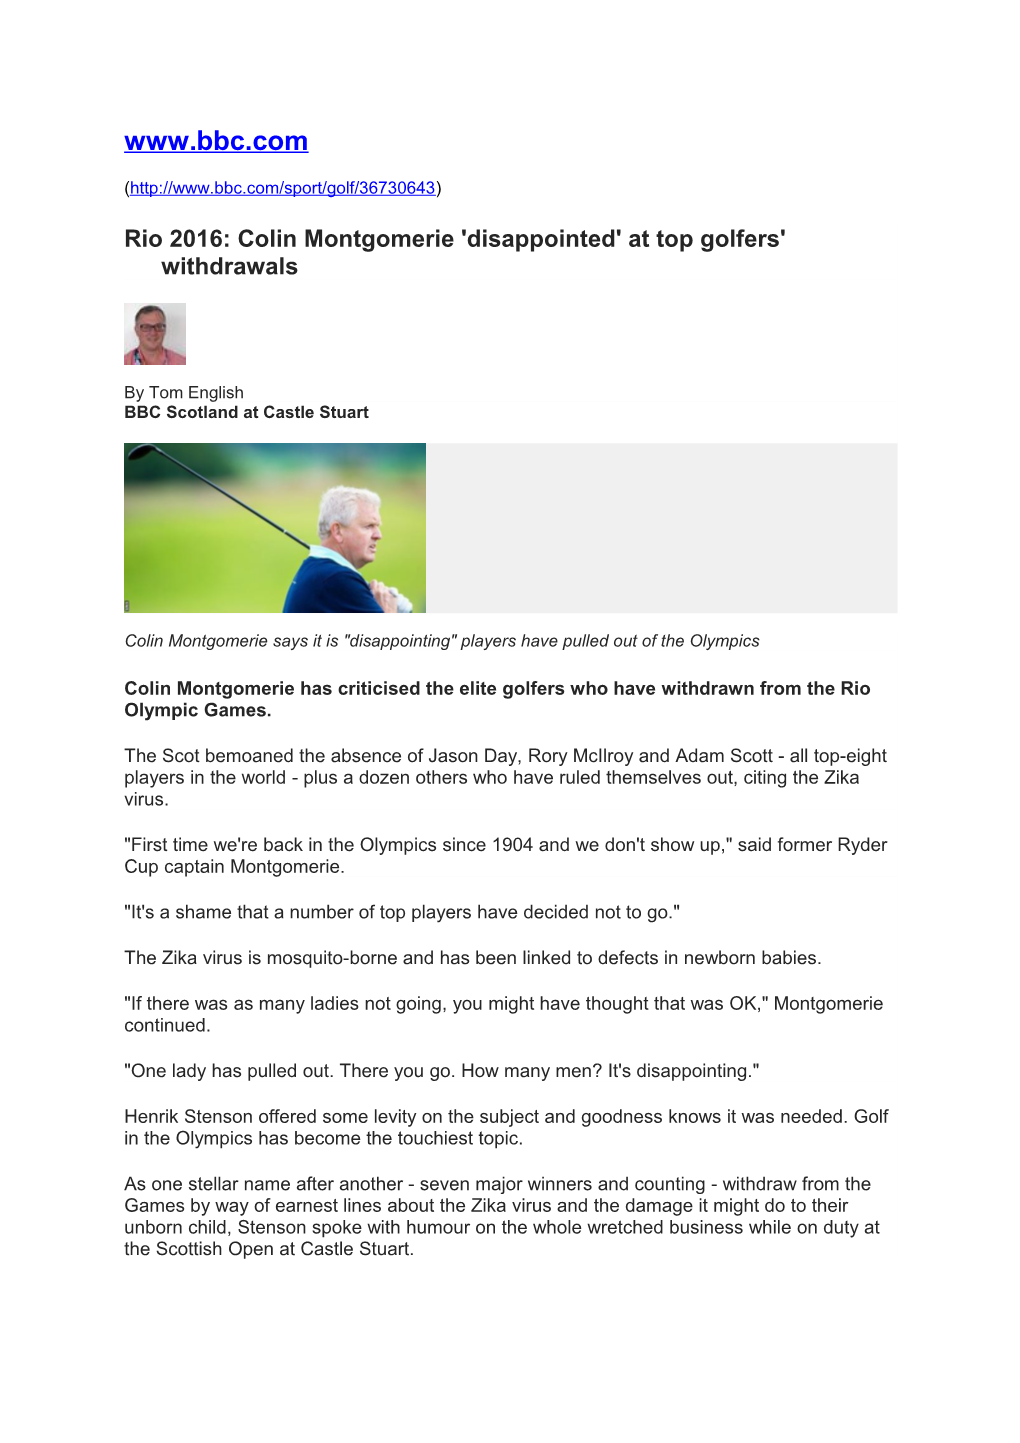 Rio 2016: Colin Montgomerie 'Disappointed' at Top Golfers' Withdrawals